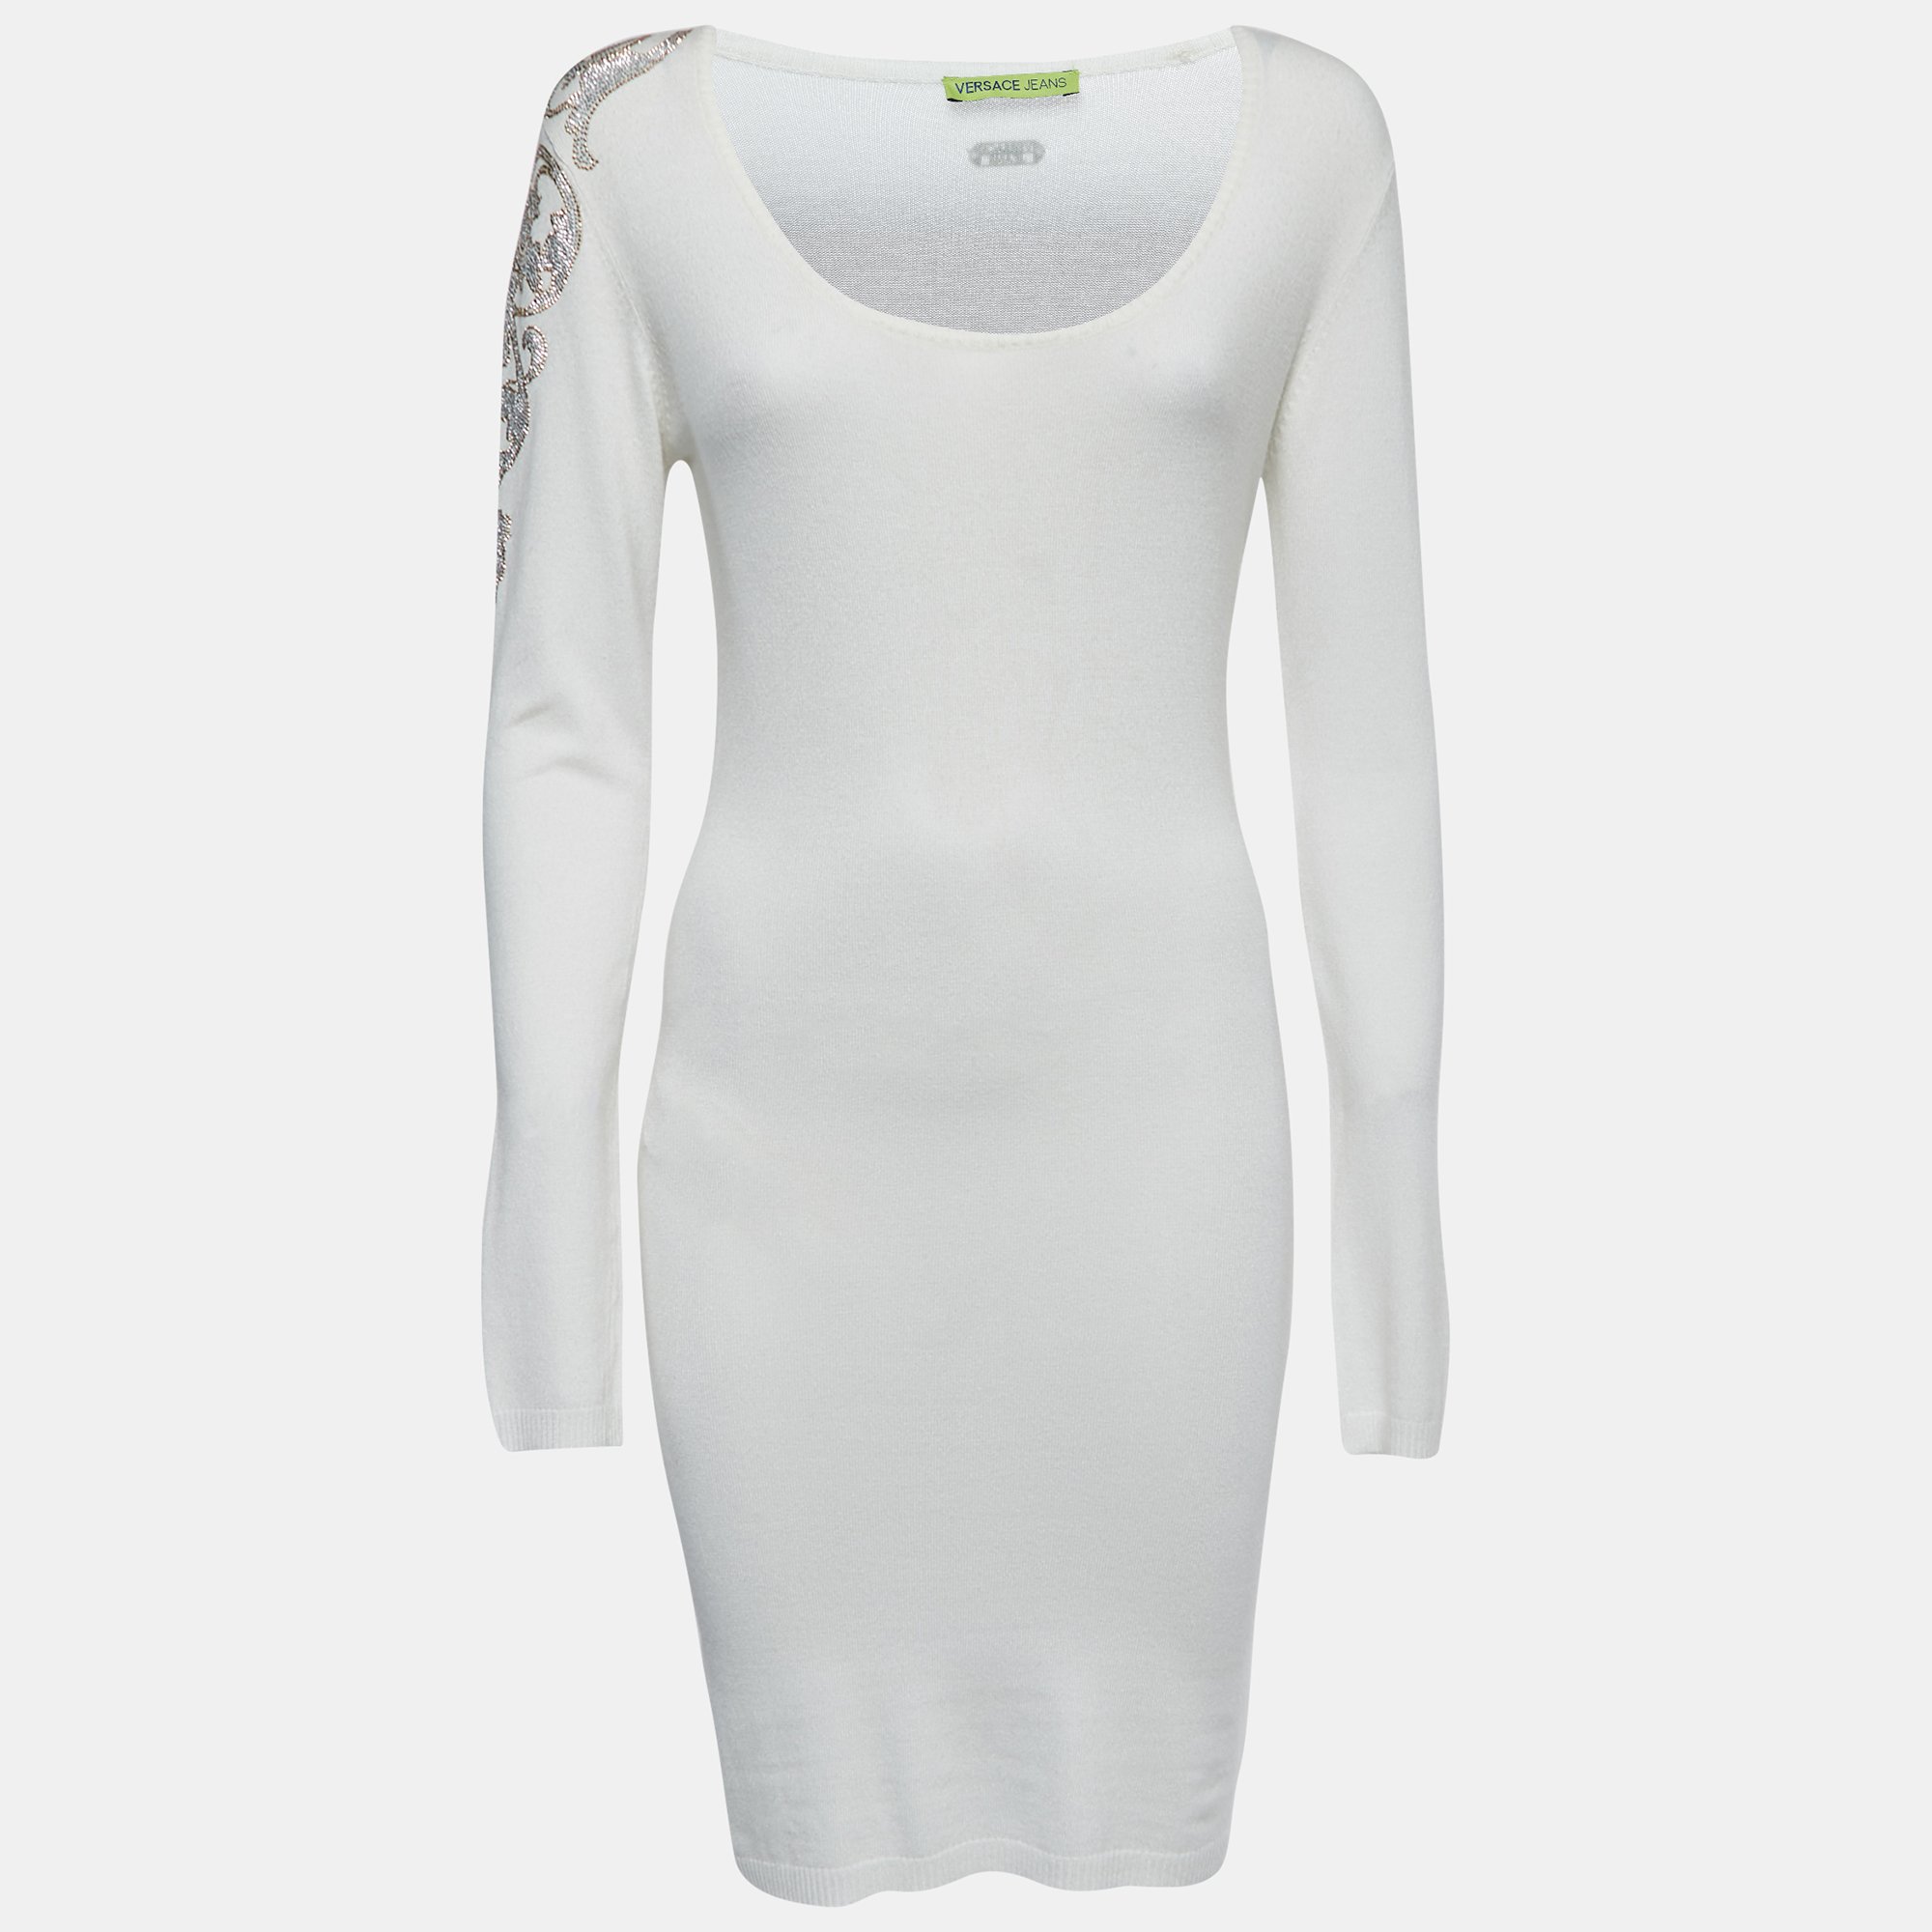 Versace Jeans White Knit Embellished Long Sleeve Bodycon Dress S